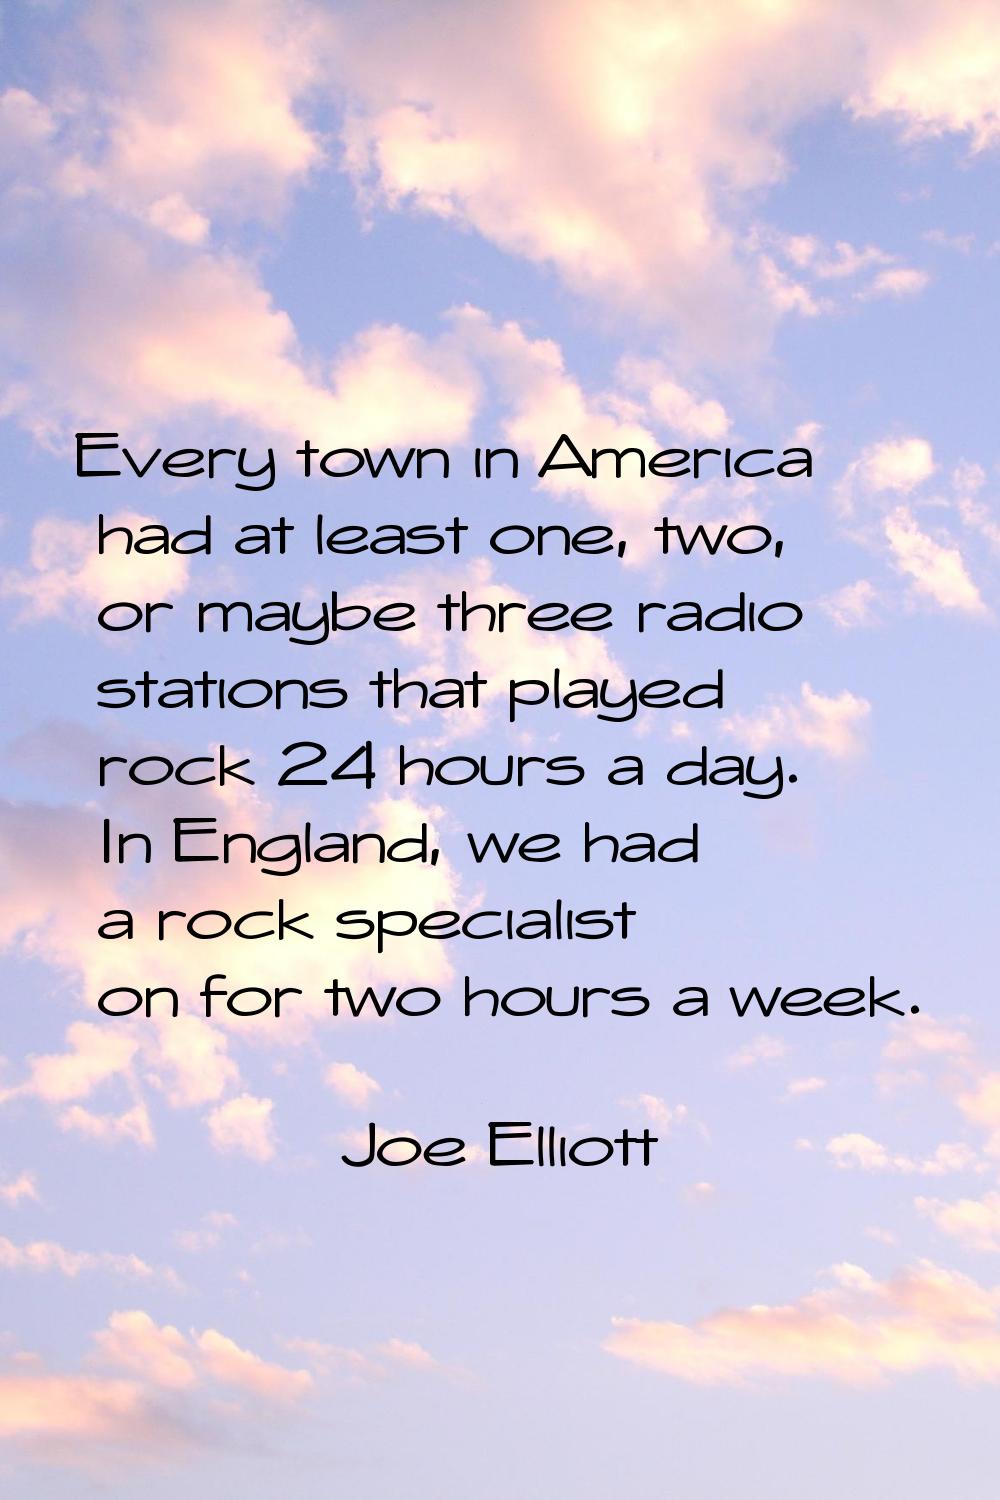 Every town in America had at least one, two, or maybe three radio stations that played rock 24 hour